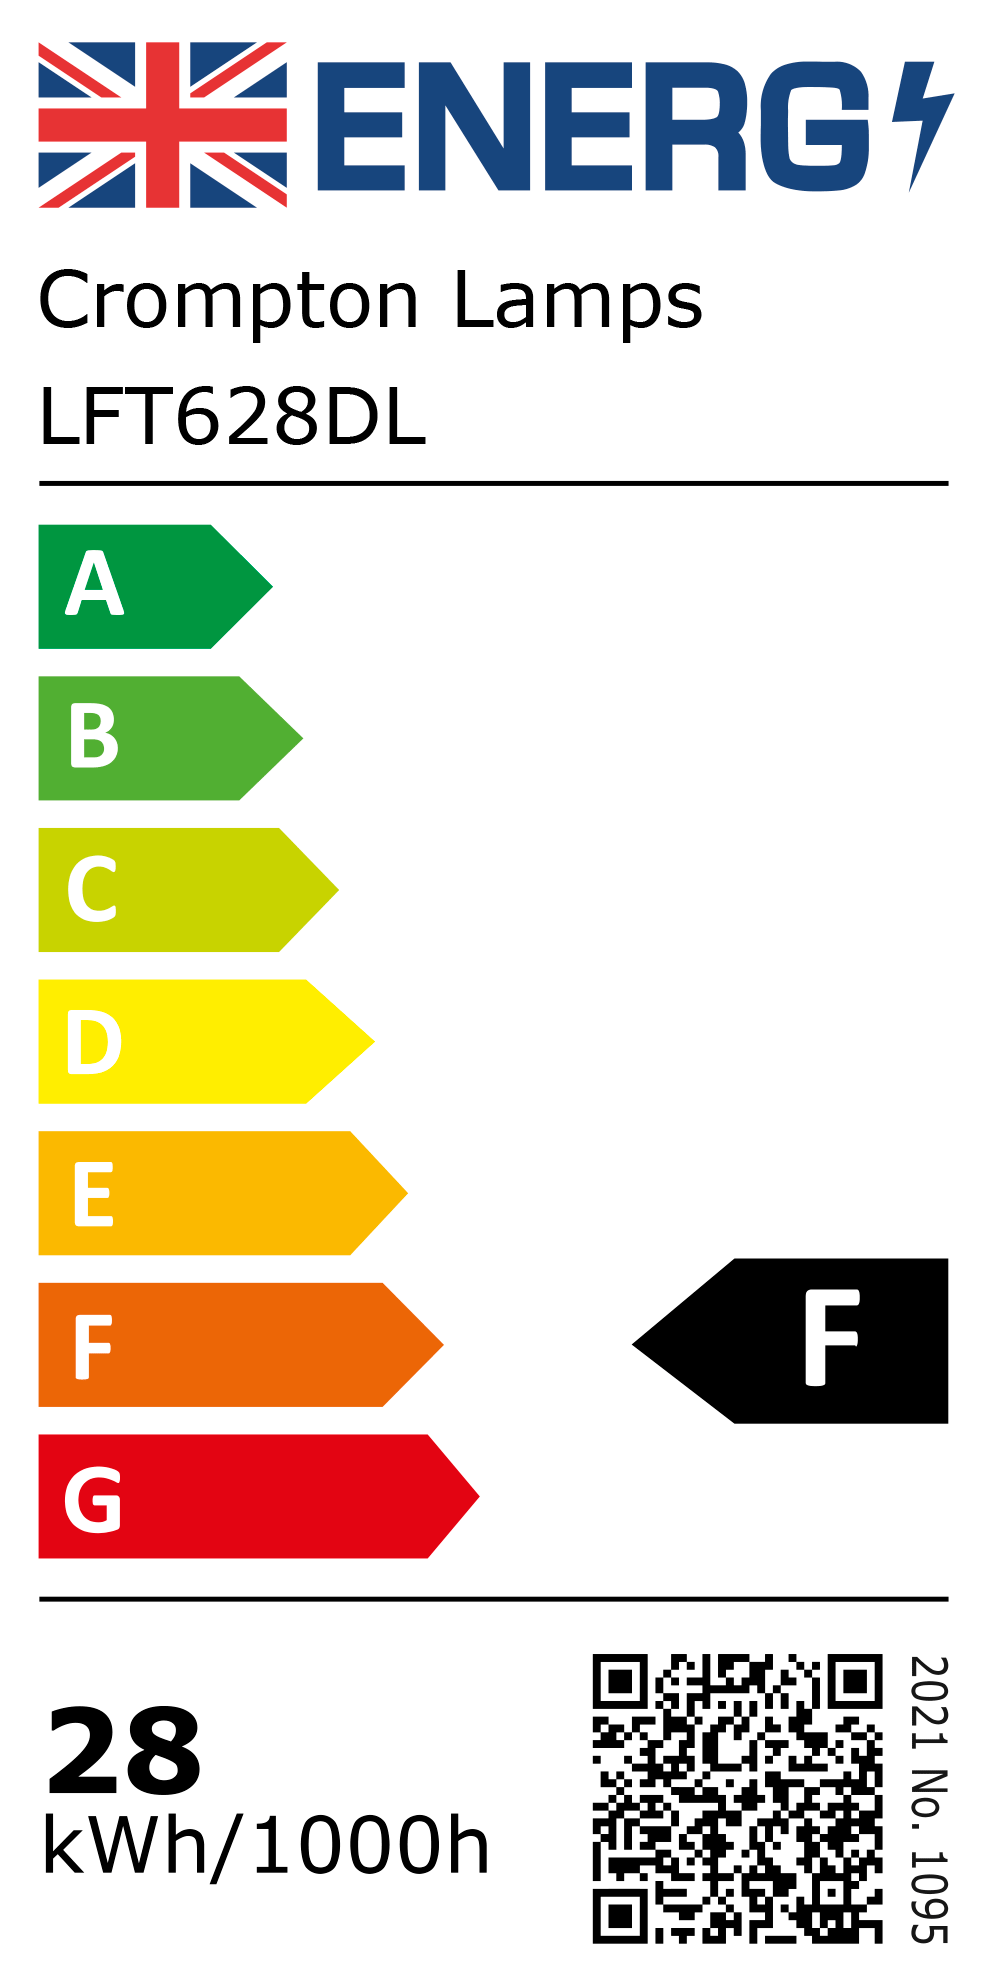 New 2021 Energy Rating Label: Stock Code LFT628DL